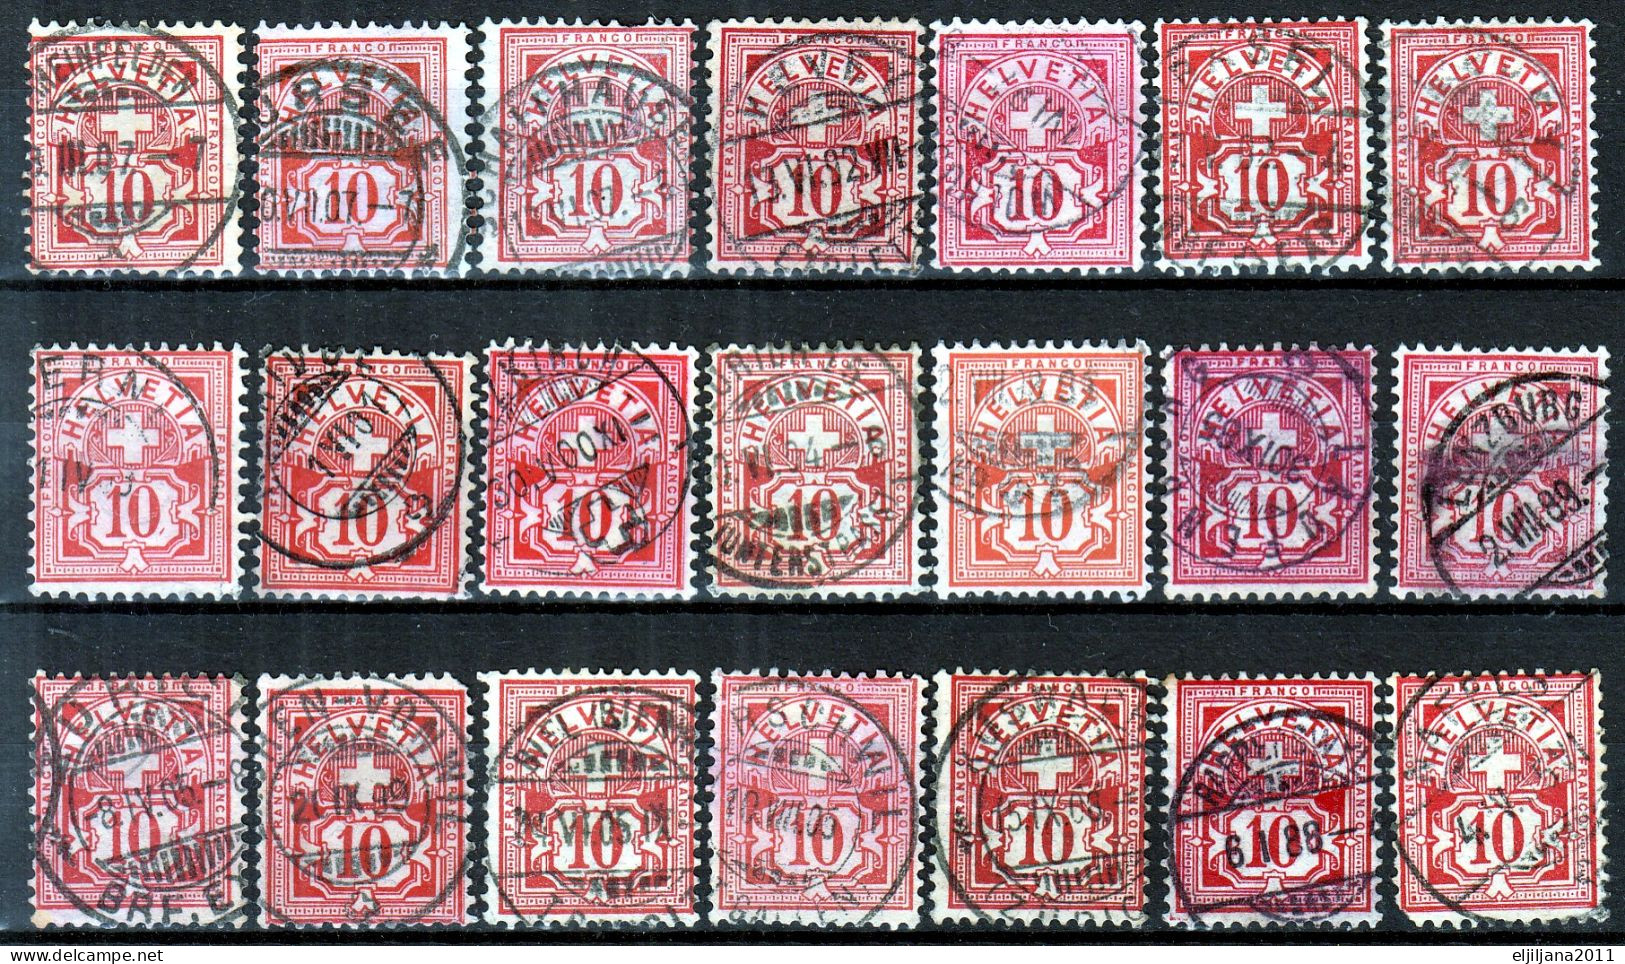 Action !! SALE !! 50 % OFF !! ⁕ Switzerland 1882 ⁕ Cross Over Value 10 C. Red ⁕ 42v Used ( Shades - Unchecked) - Oblitérés